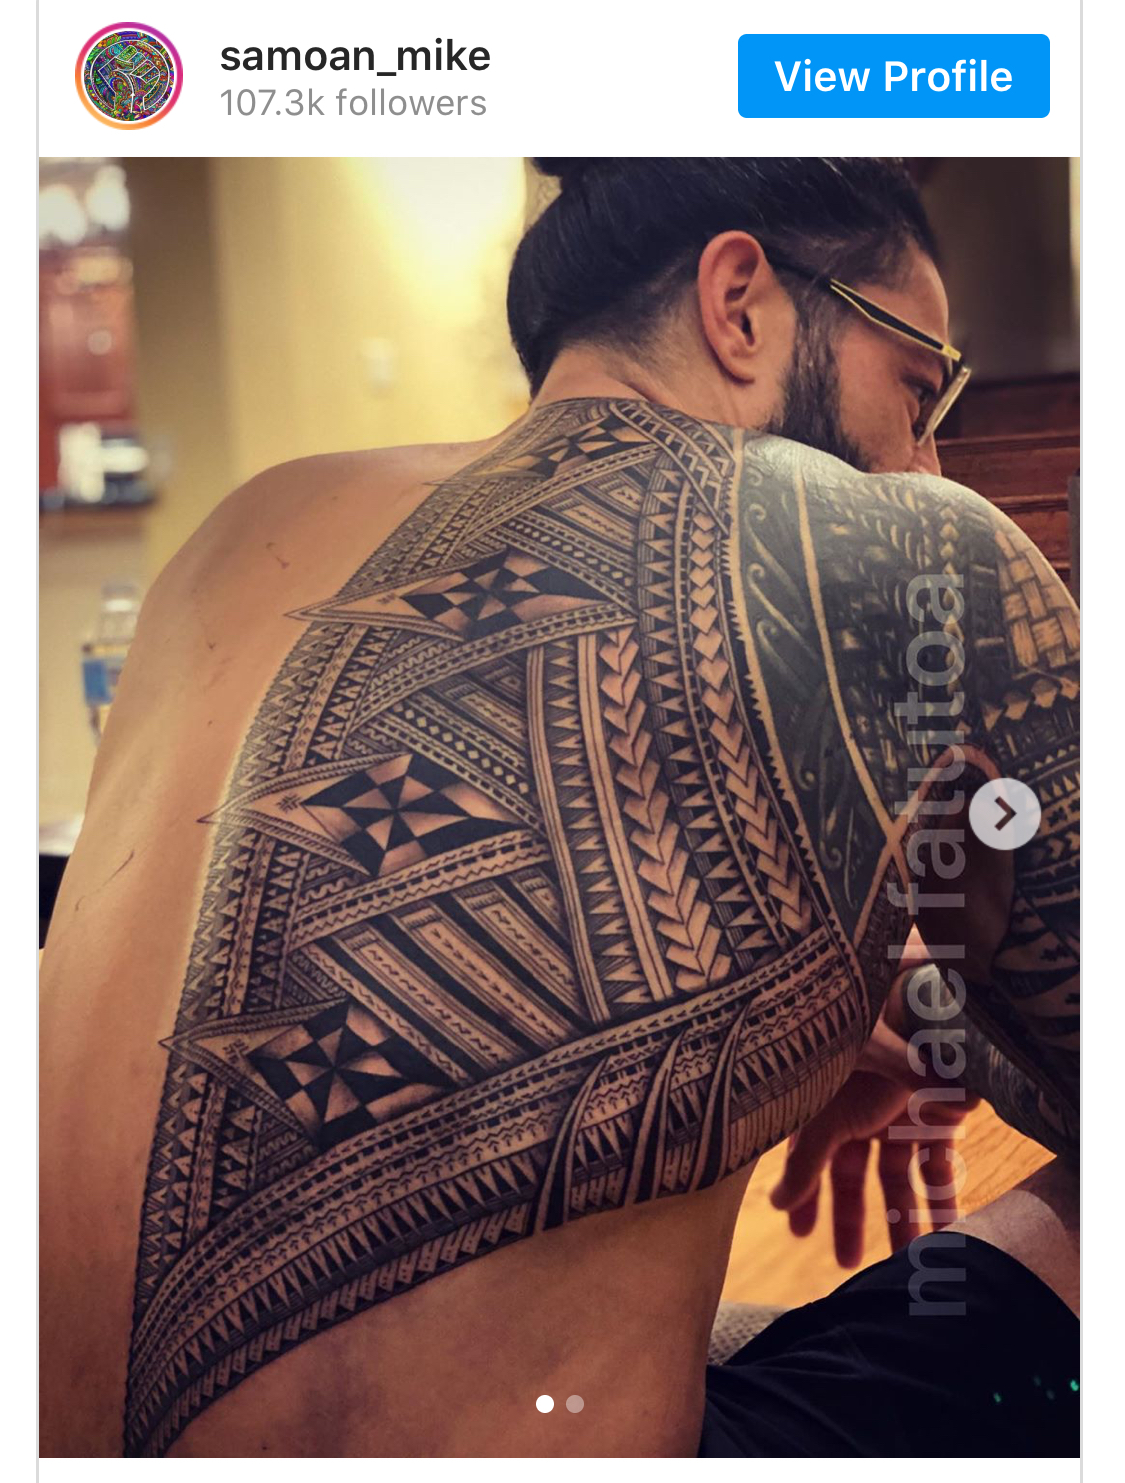 Roman Reigns tattoos How many does he have and what do they mean